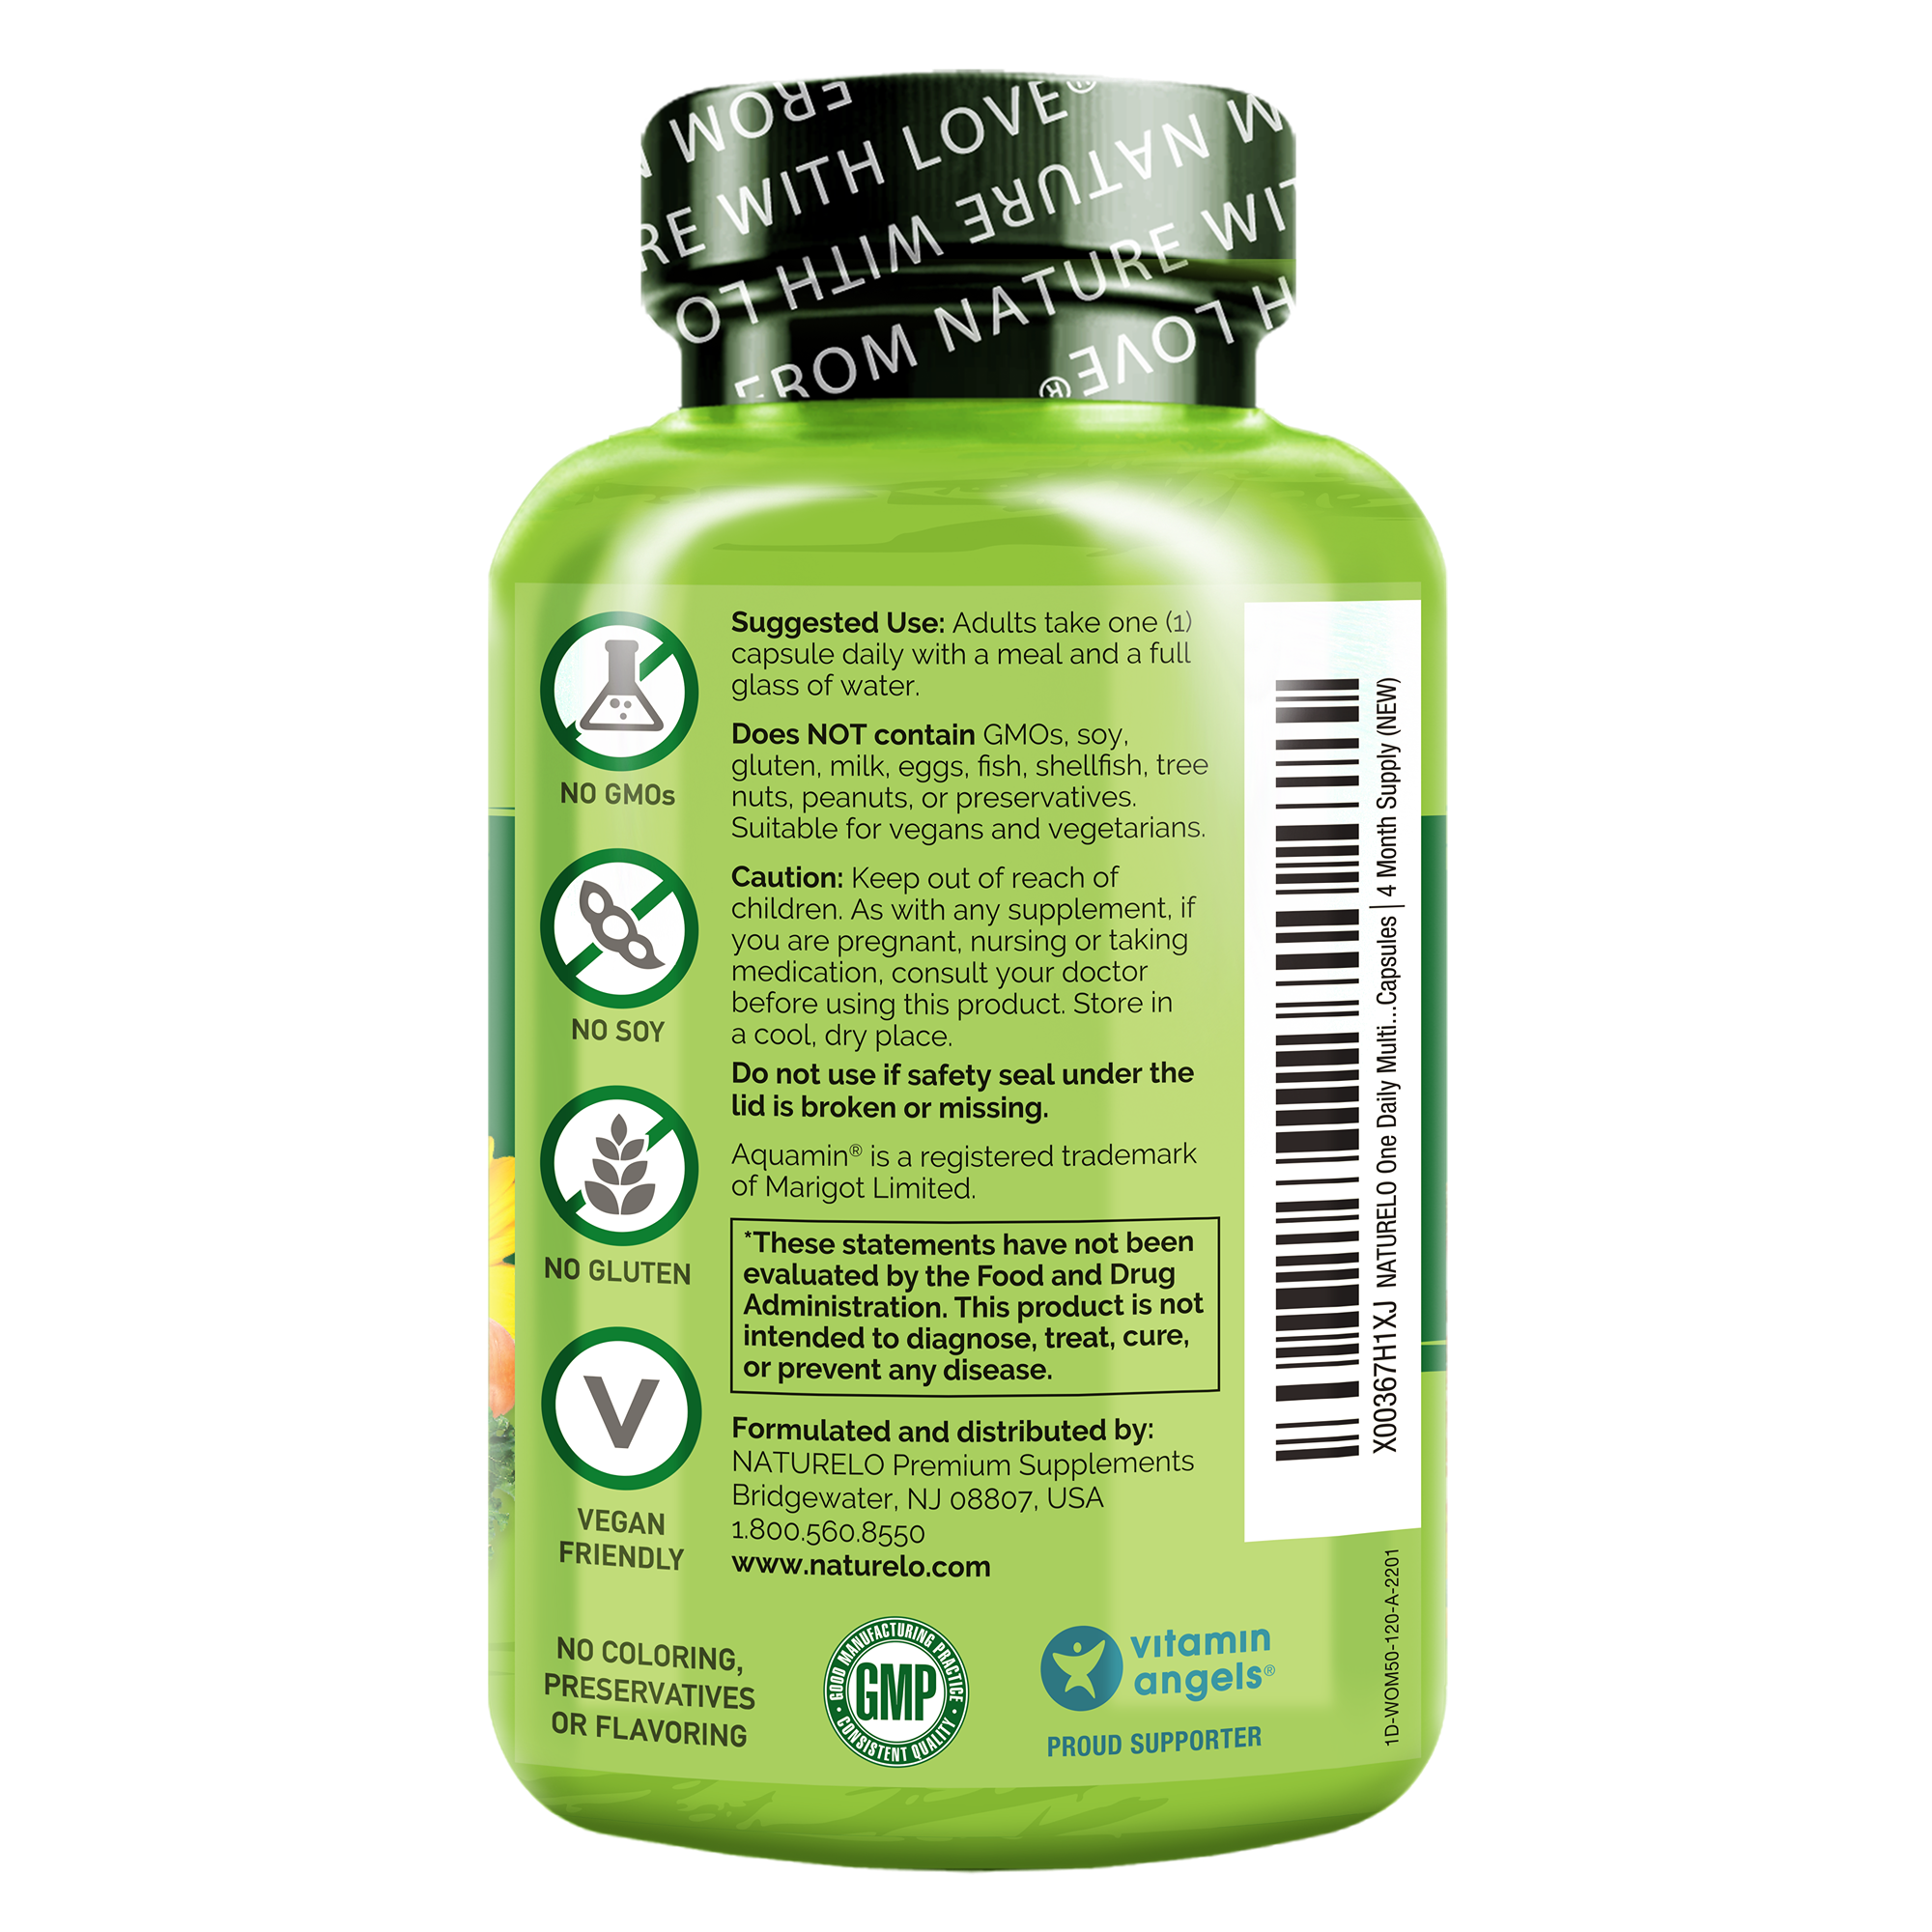 One Daily Multivitamin for Women Over 50 - Plant-Based, Whole Food Vitamin